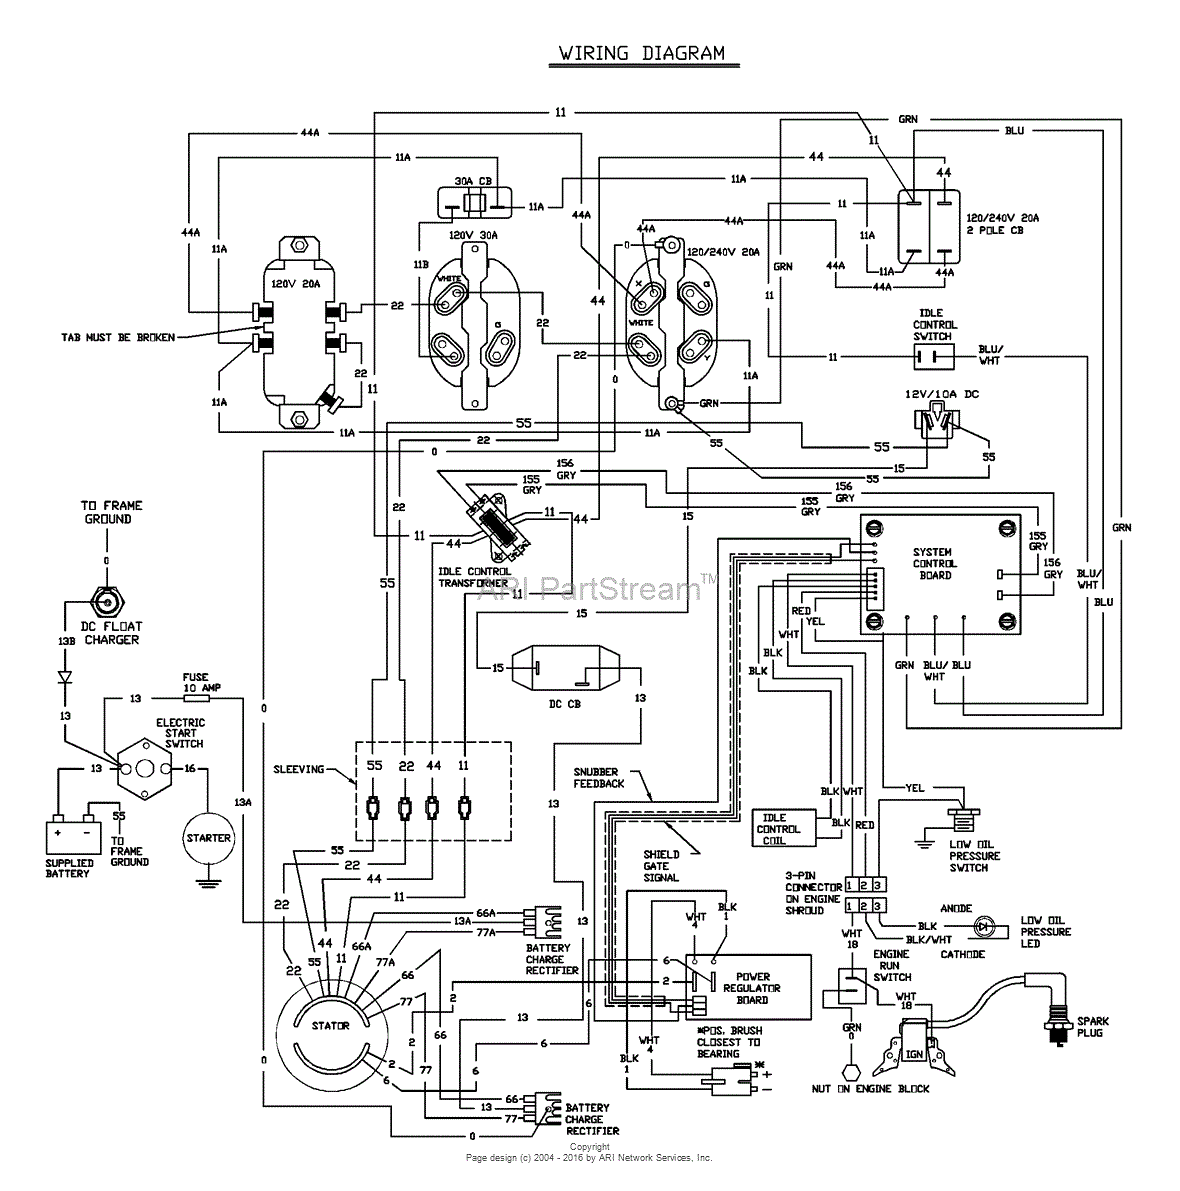 Briggs and Stratton Power Products 1656-1 - 4,000 Watt Parts Diagram ...